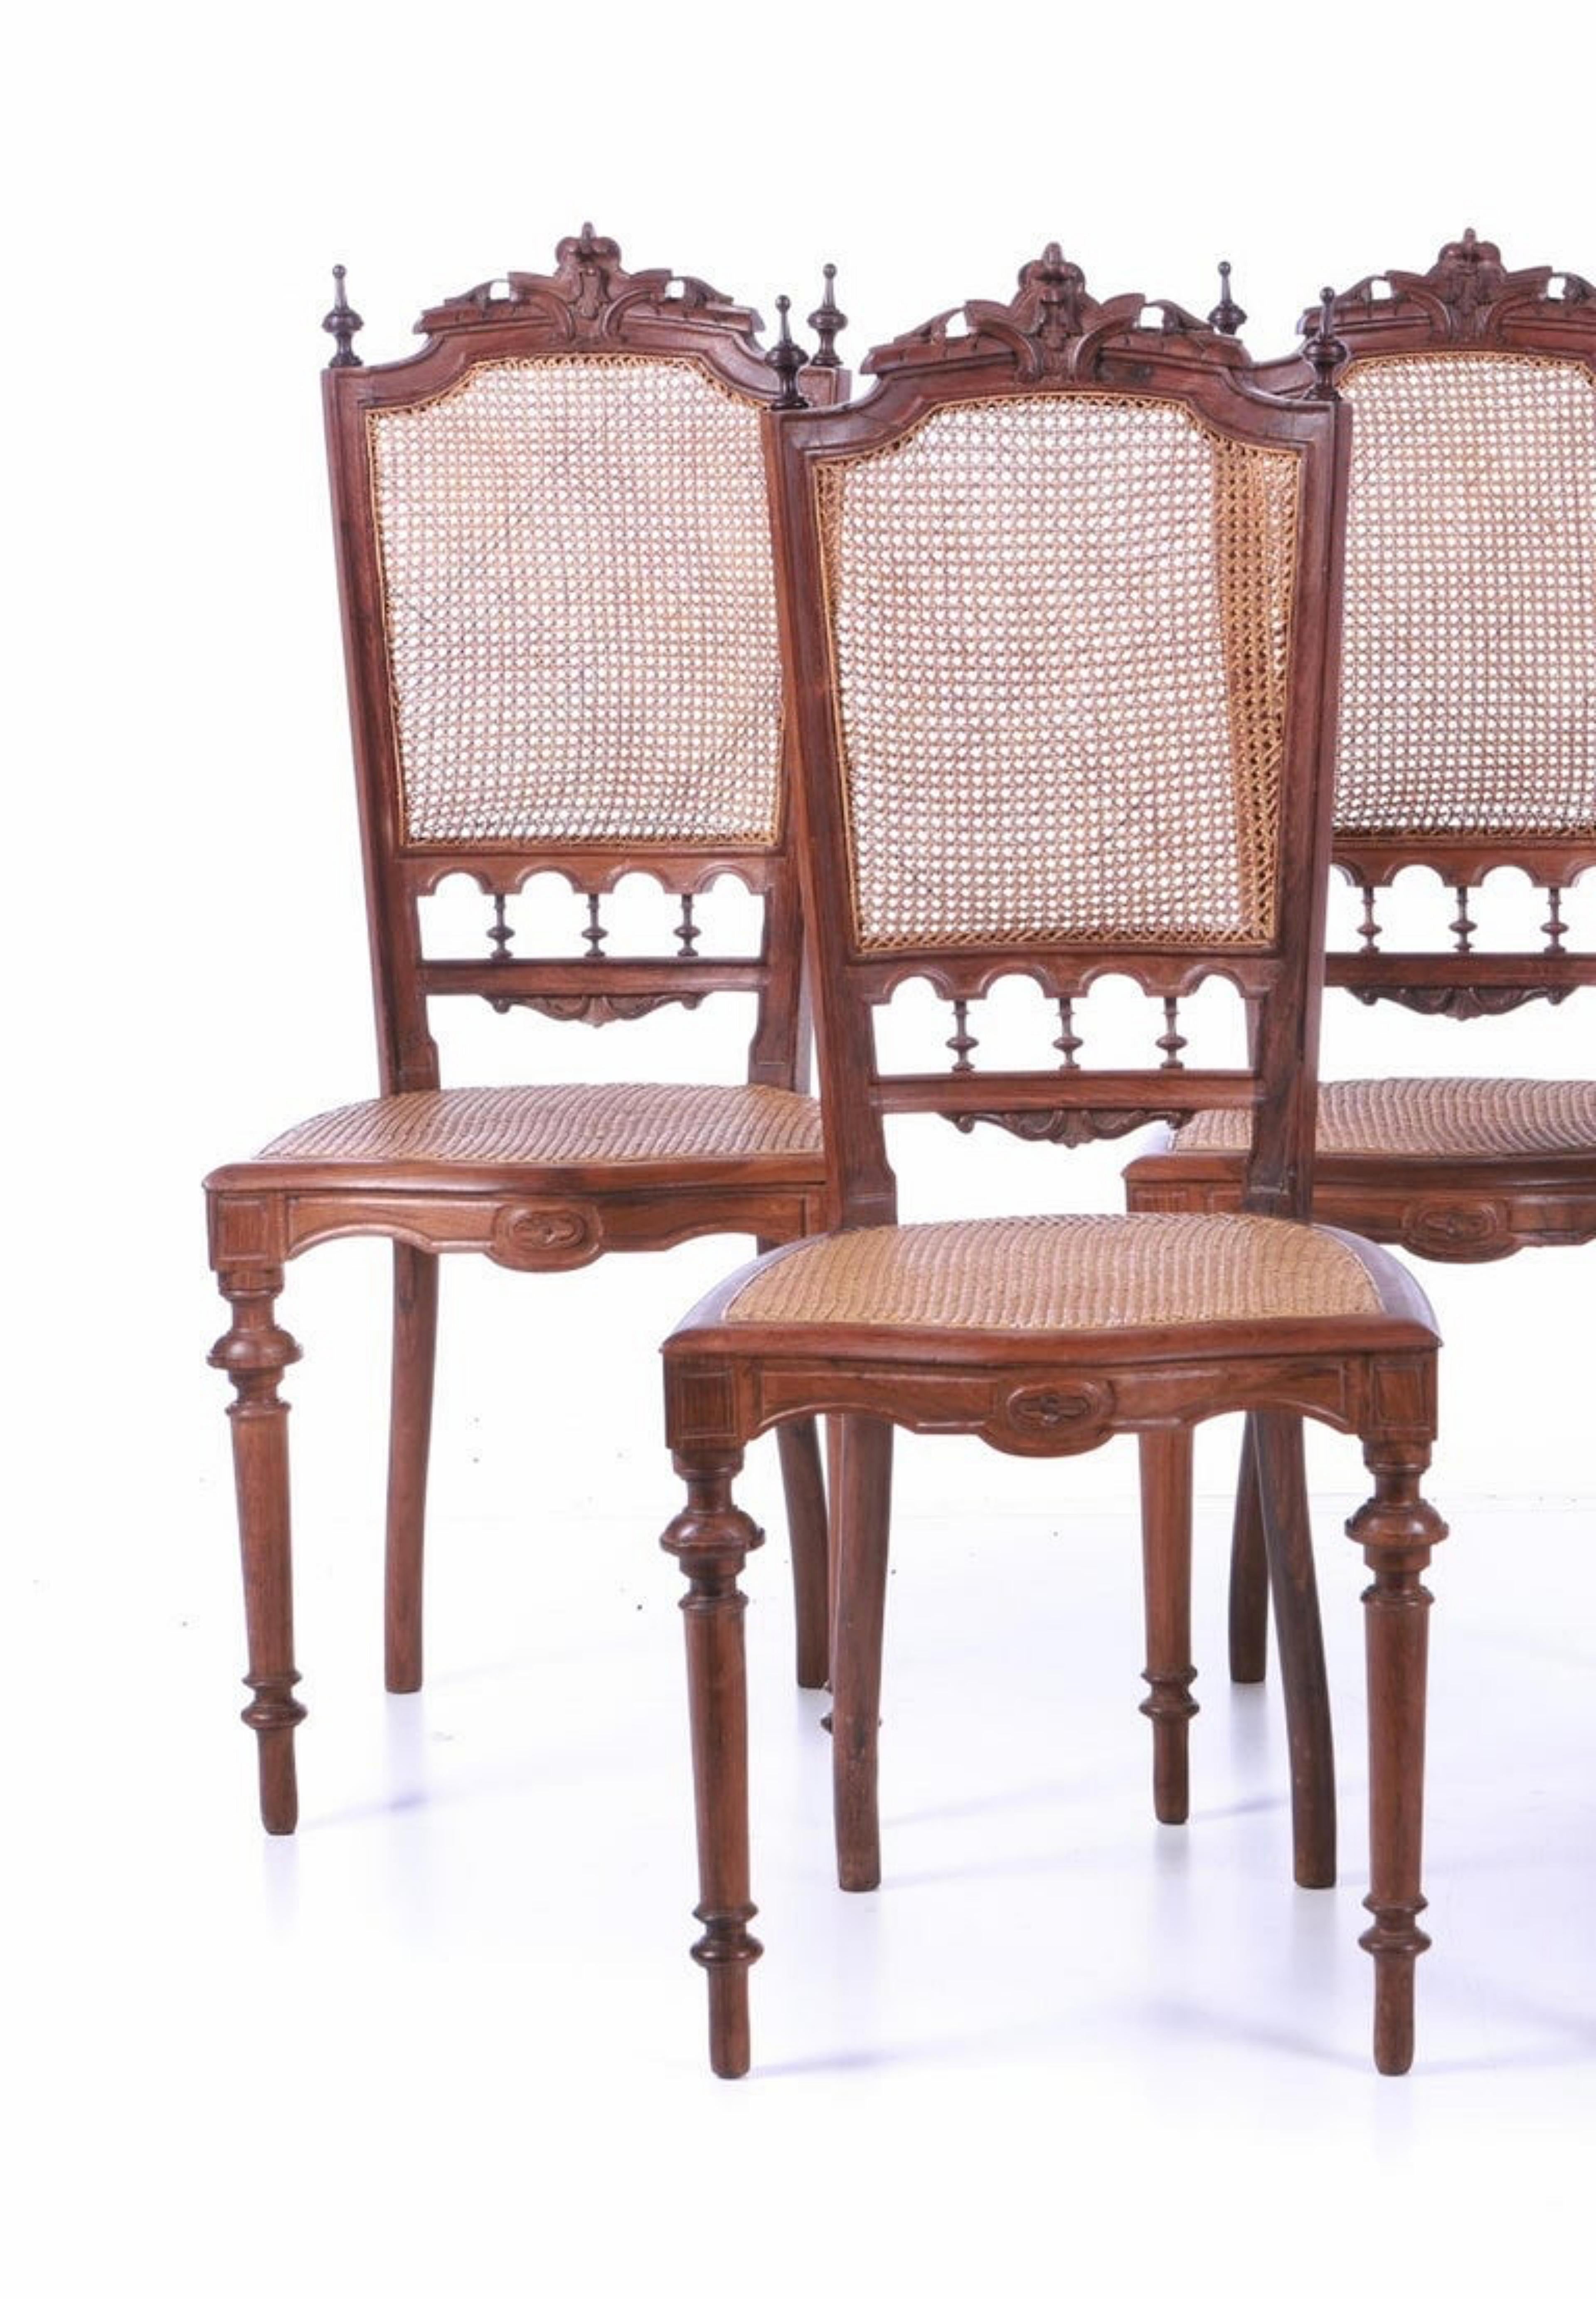 Baroque 4 Portuguese Chairs 19th Century in Brazilian Rosewood For Sale